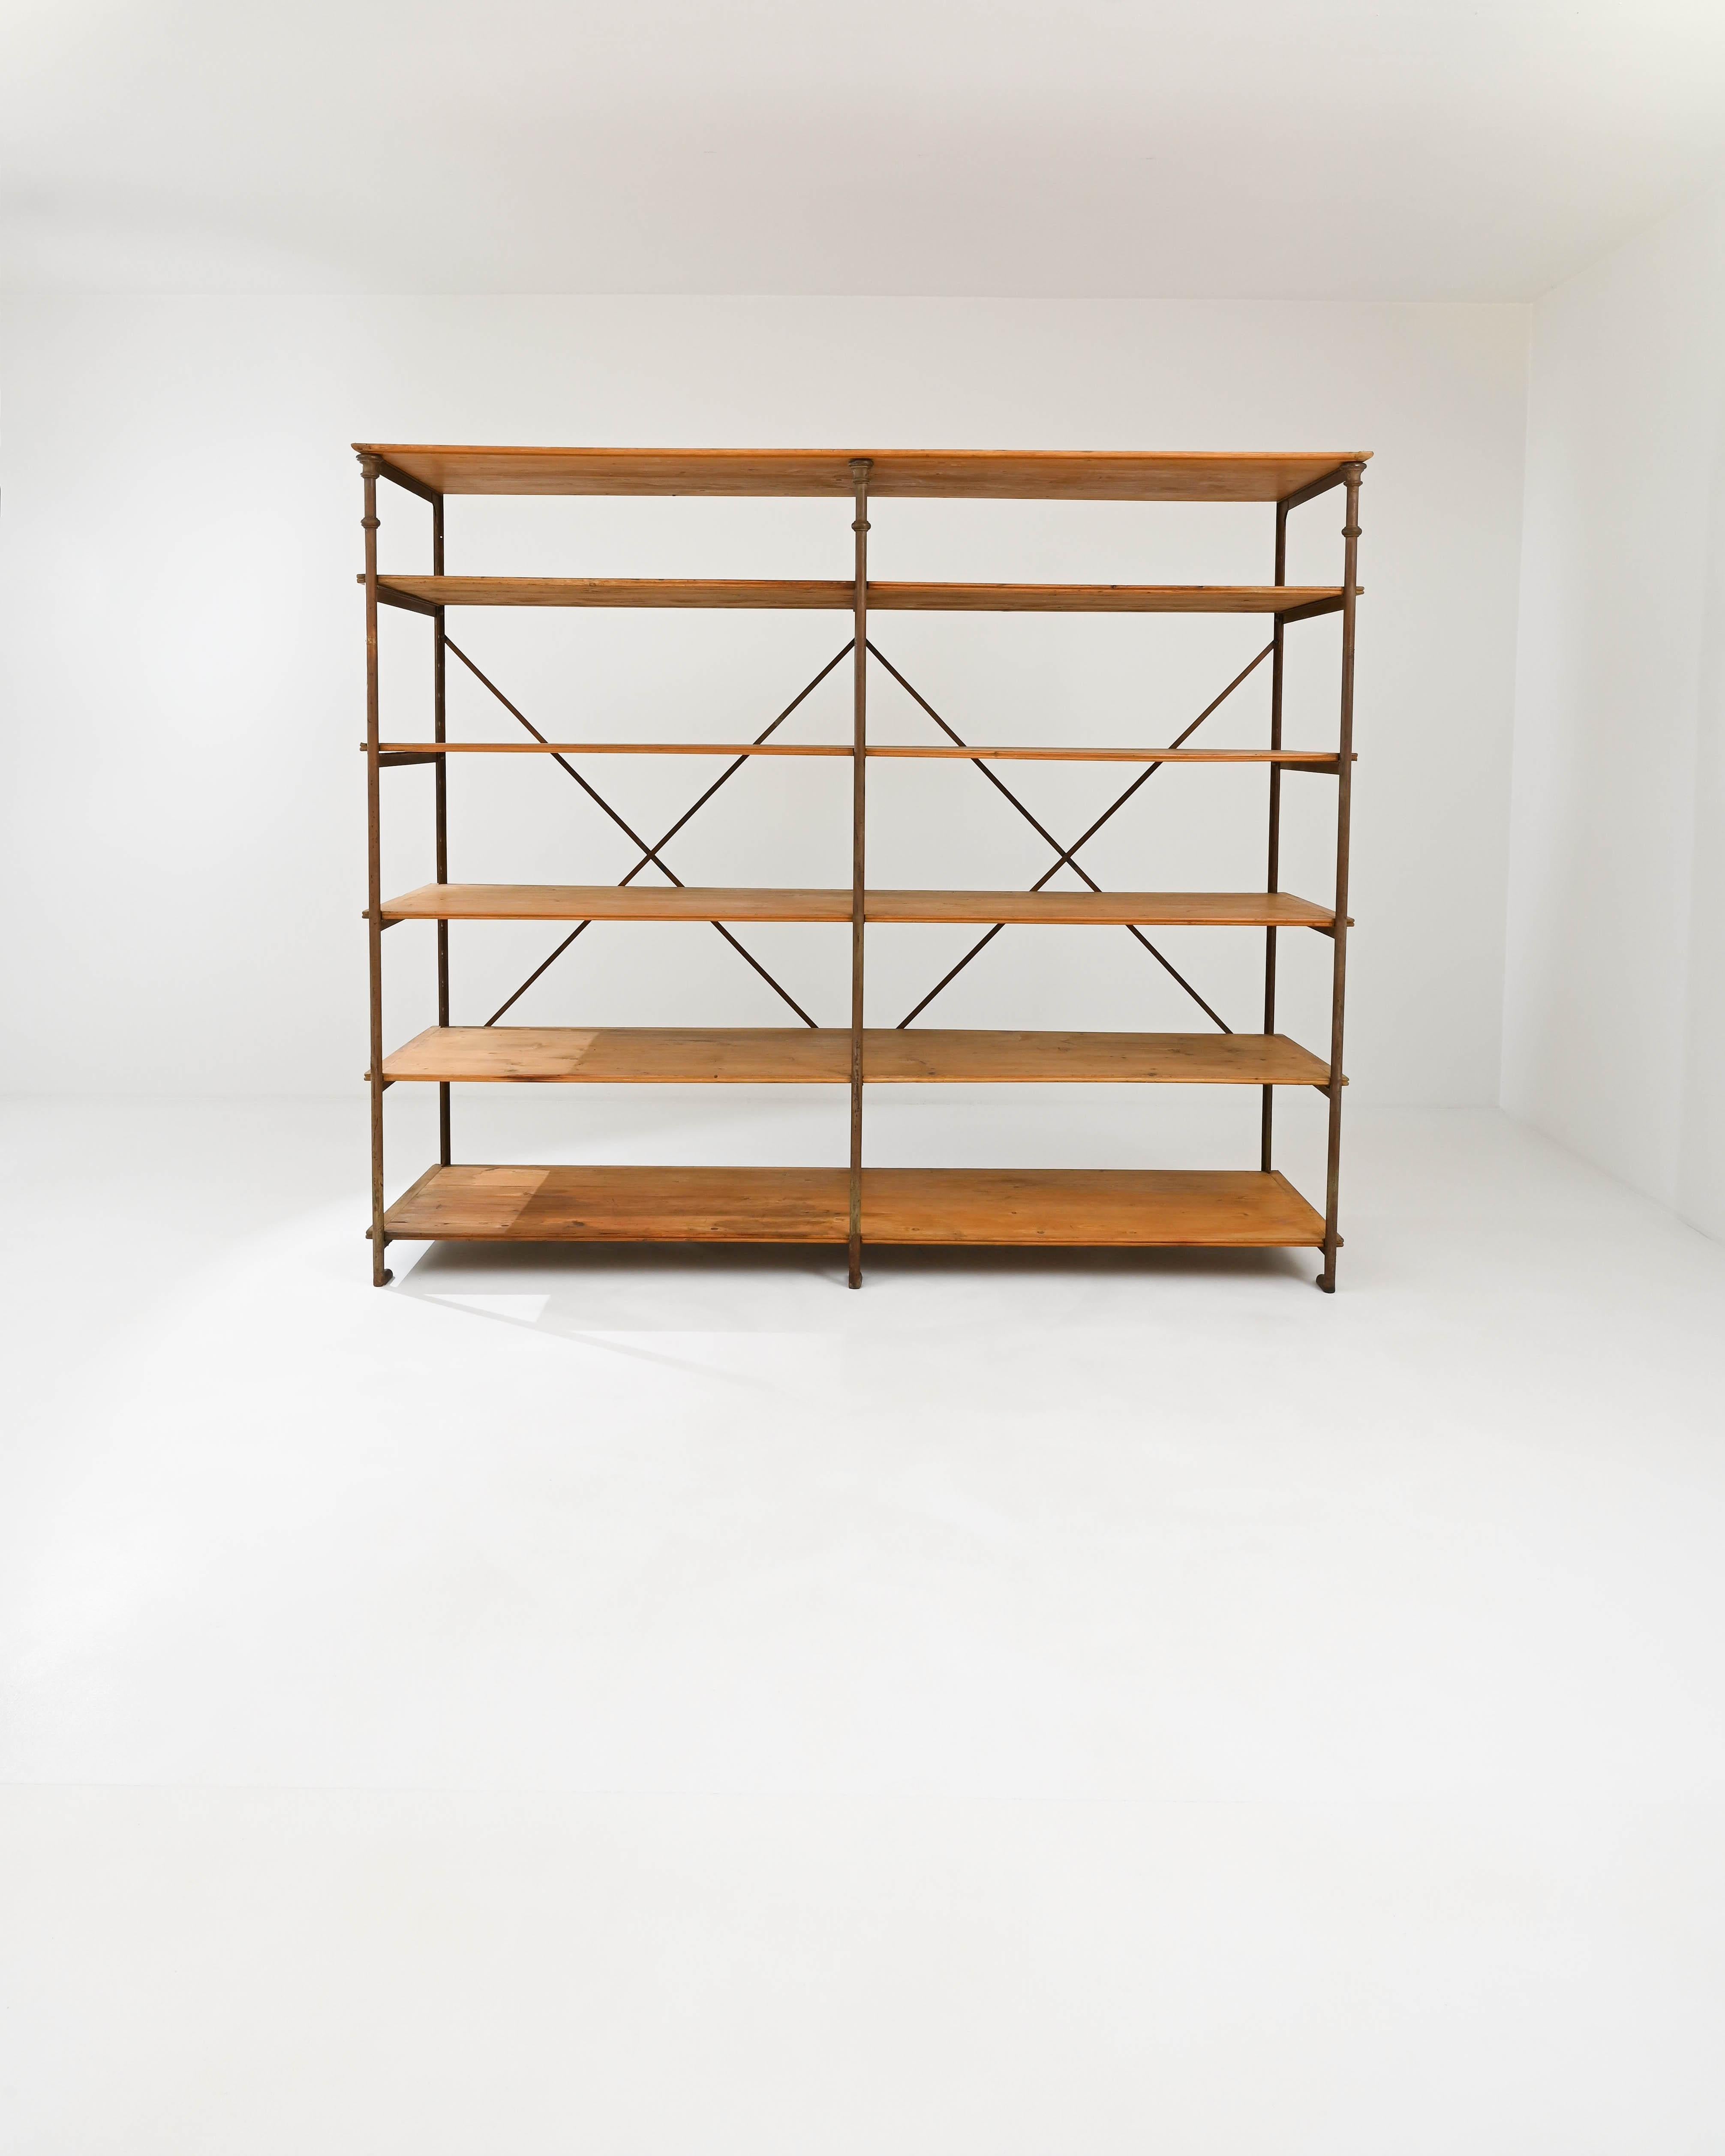 French Turn of the Century Parisian Industrial Shelving by Theodore Scherf